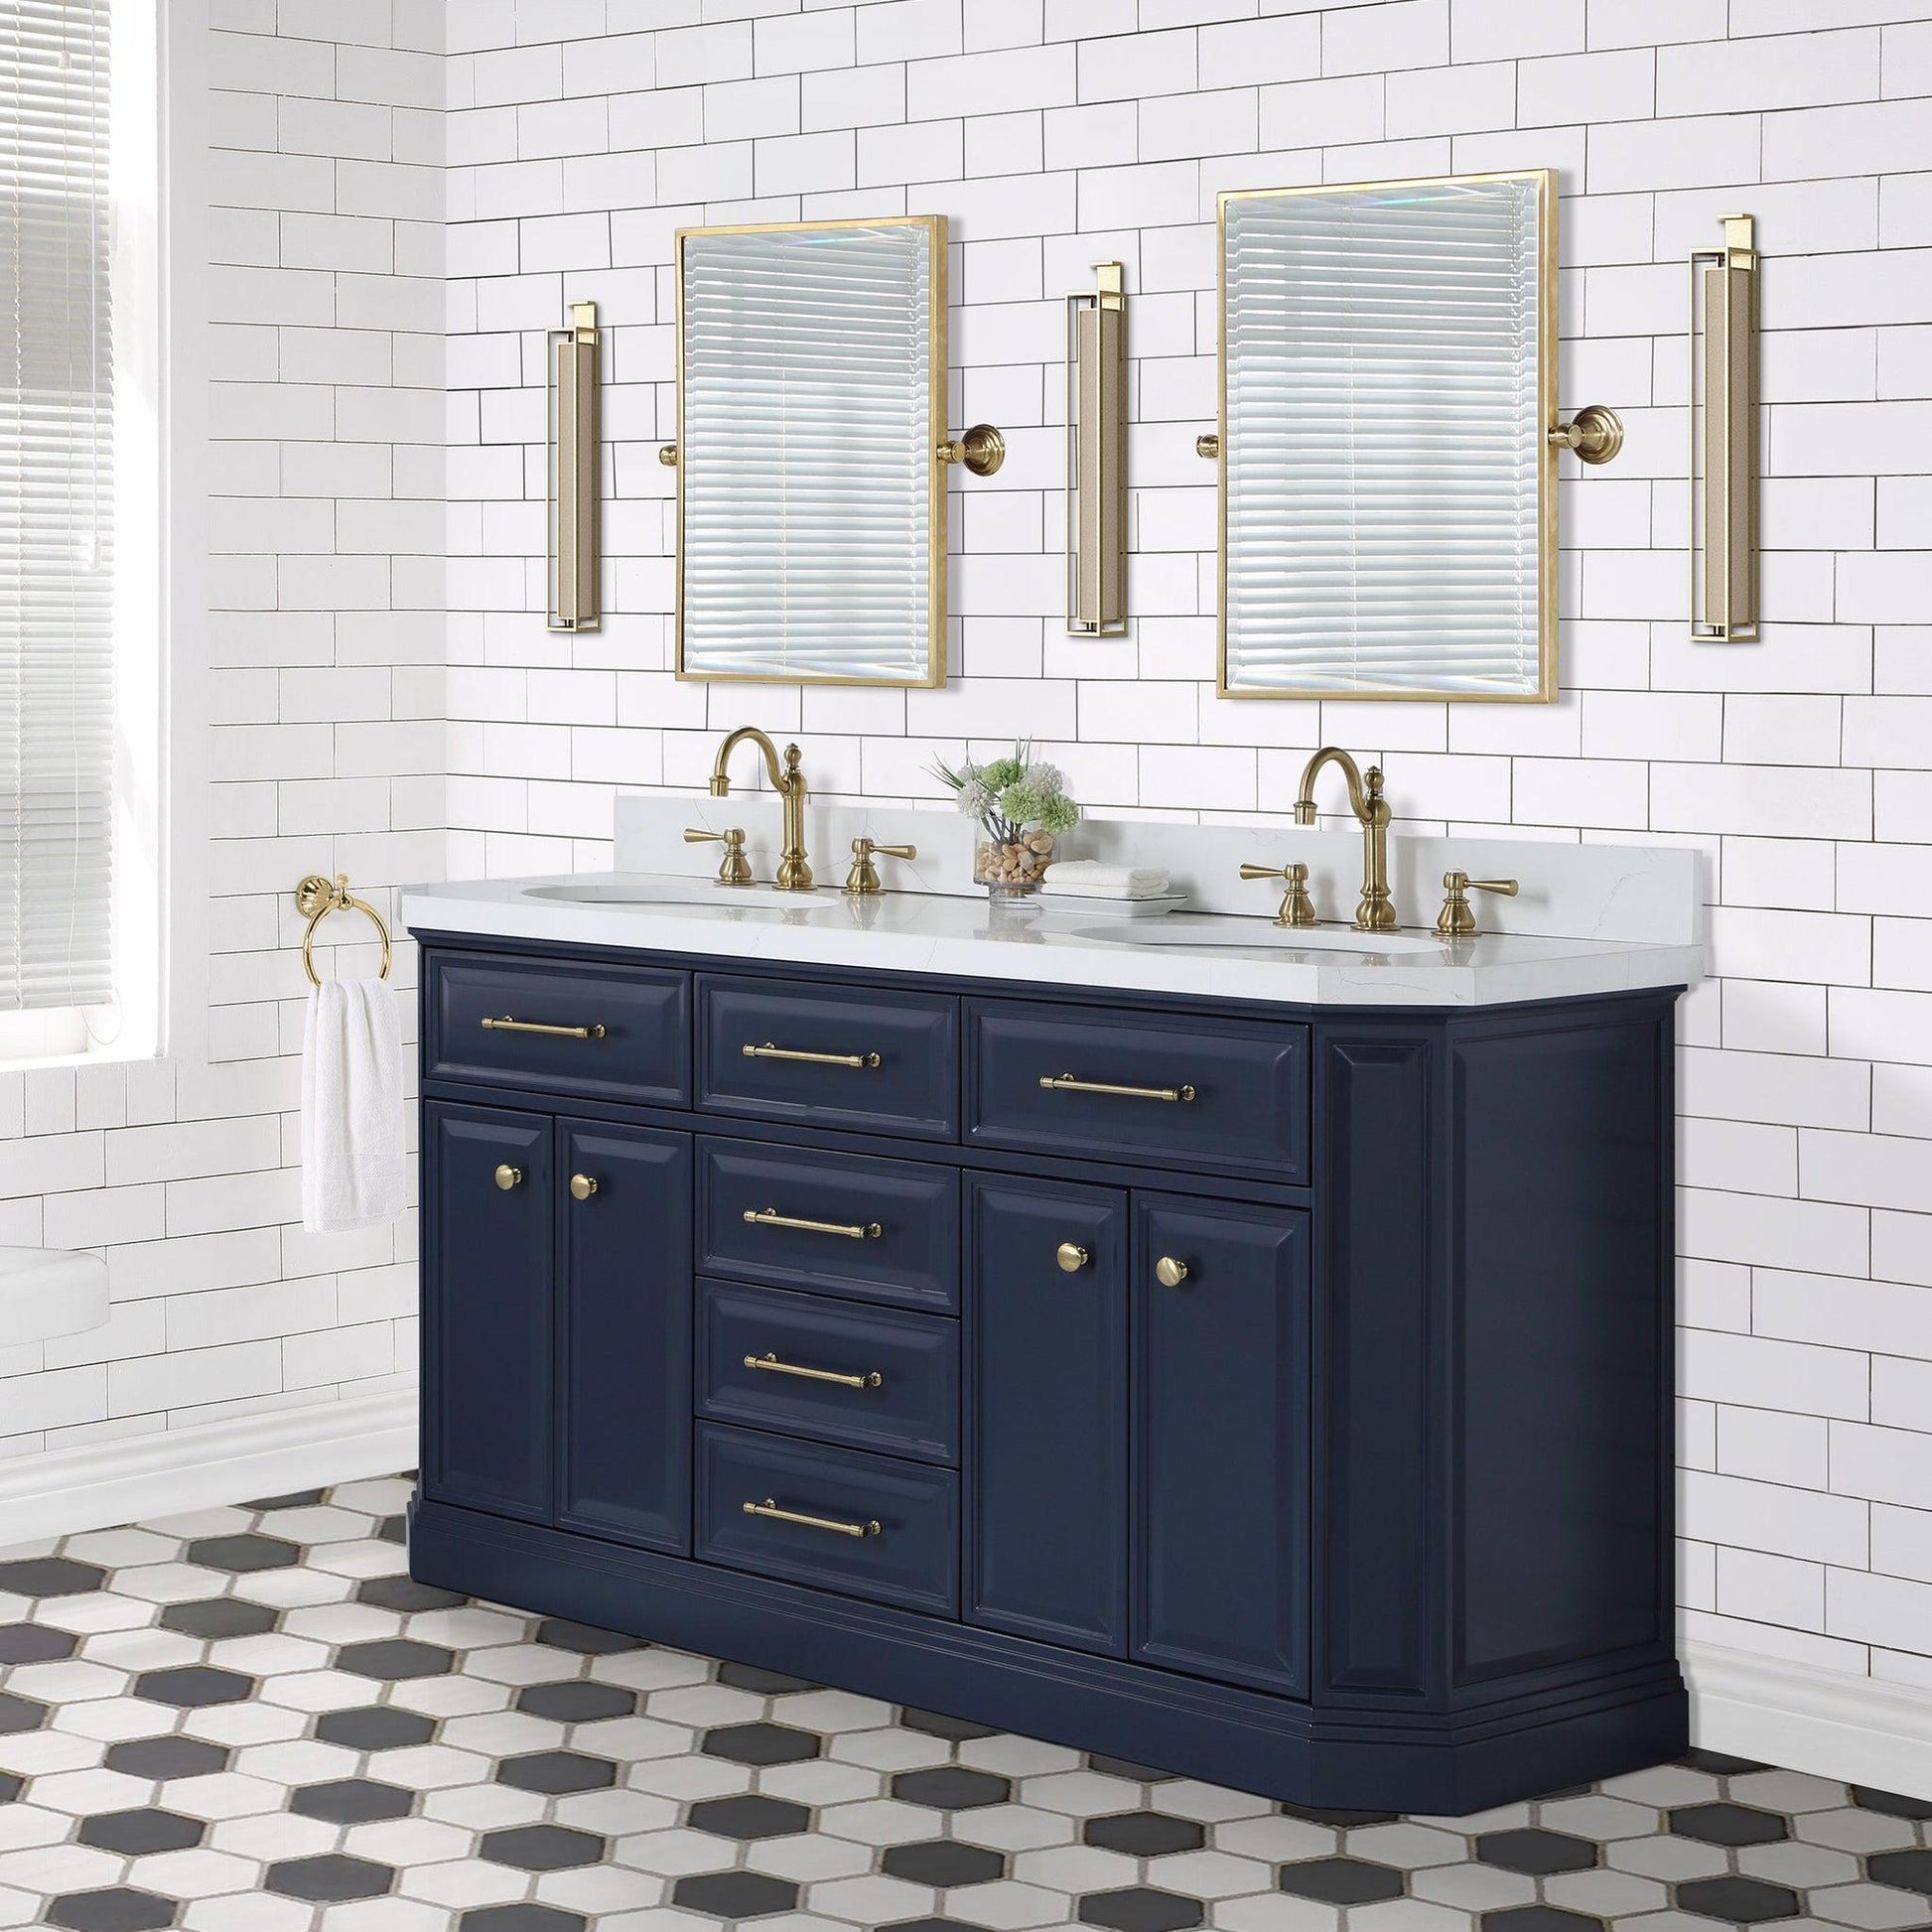 Water Creation Palace 60" Double Sink White Quartz Countertop Vanity in Monarch Blue with Hook Faucets